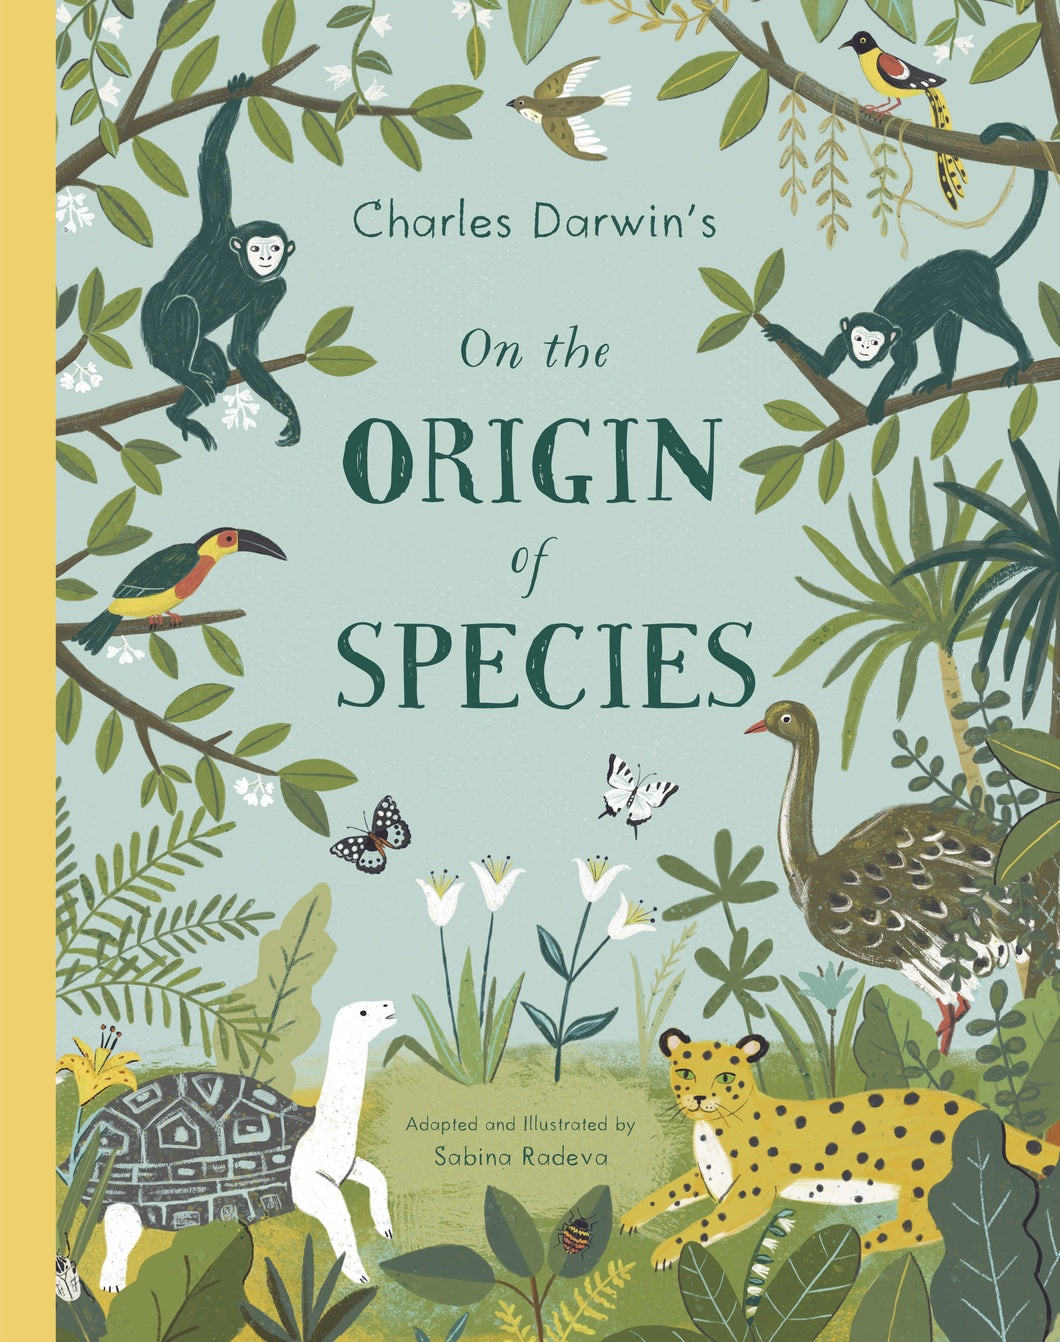 Charles Darwin's On the Origin of Species - Things They Love